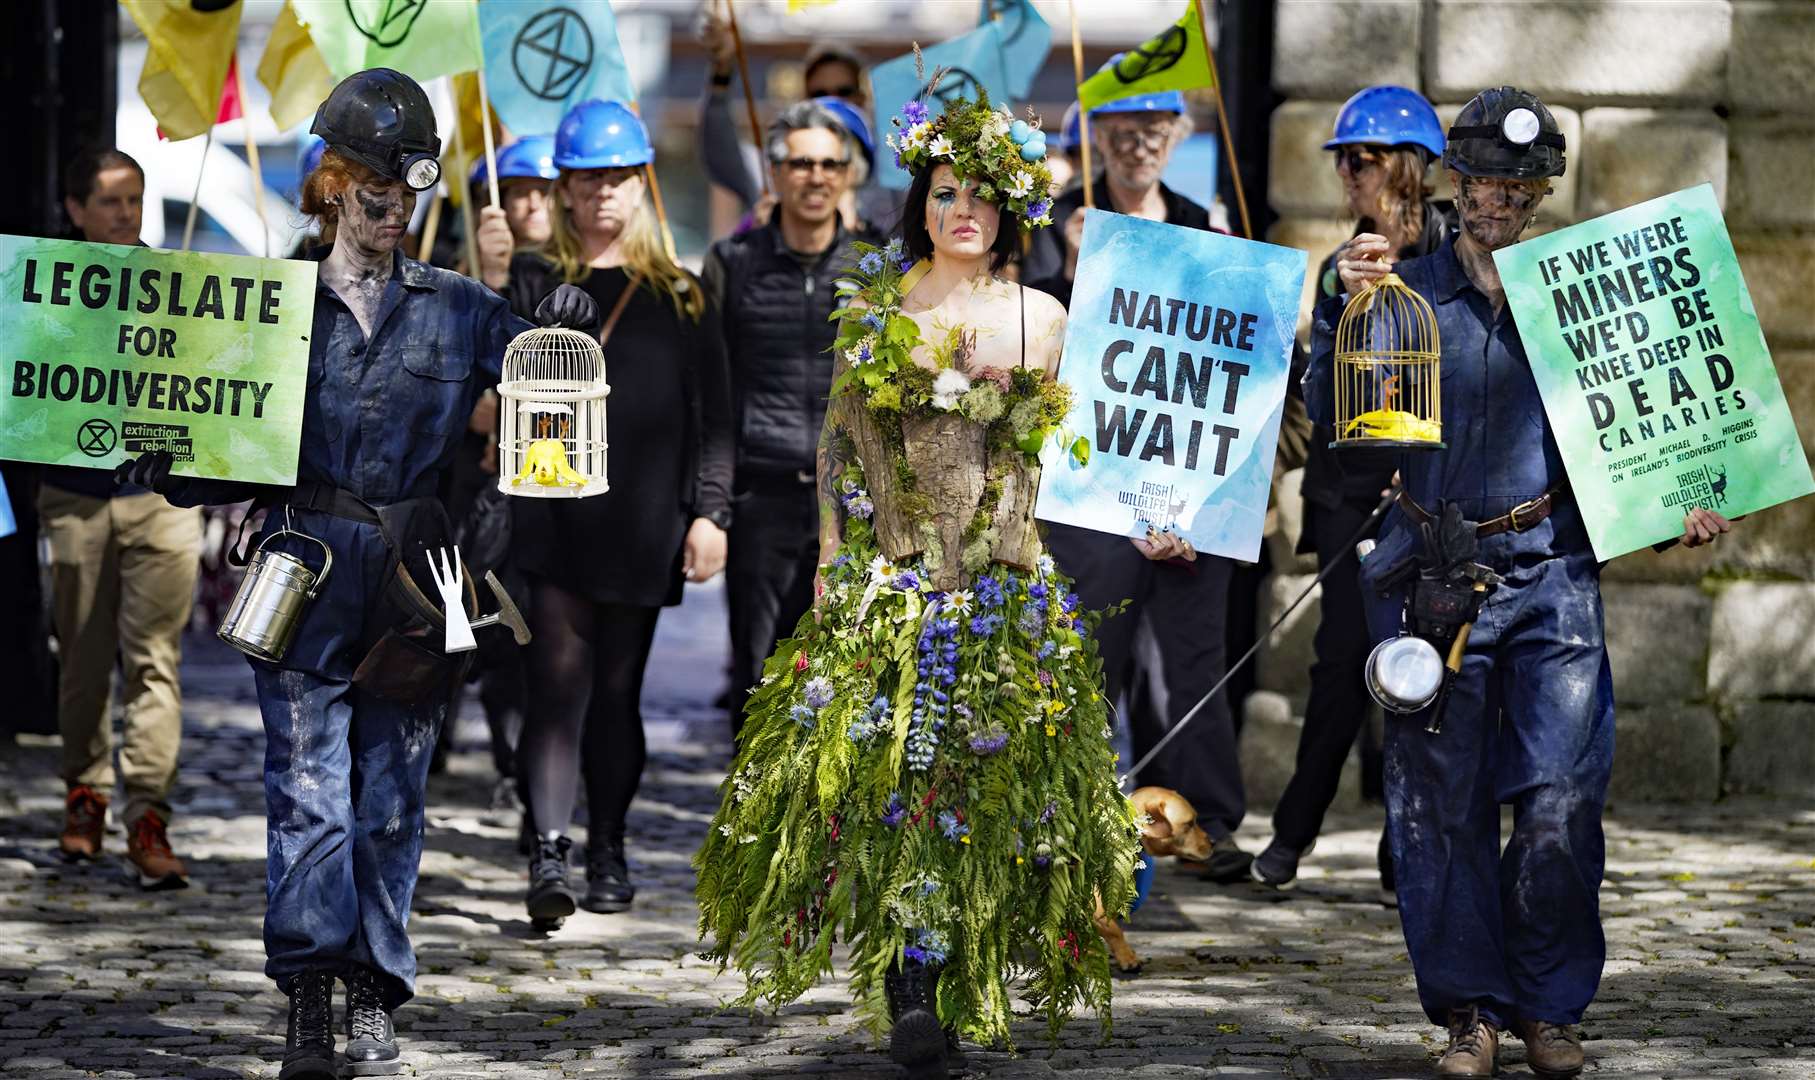 Environmental campaigners urge the Government to introduce legislation in the form of a Biodiversity Act during a protest outside the national biodiversity conference in Dublin Castle (Niall Carson/PA)